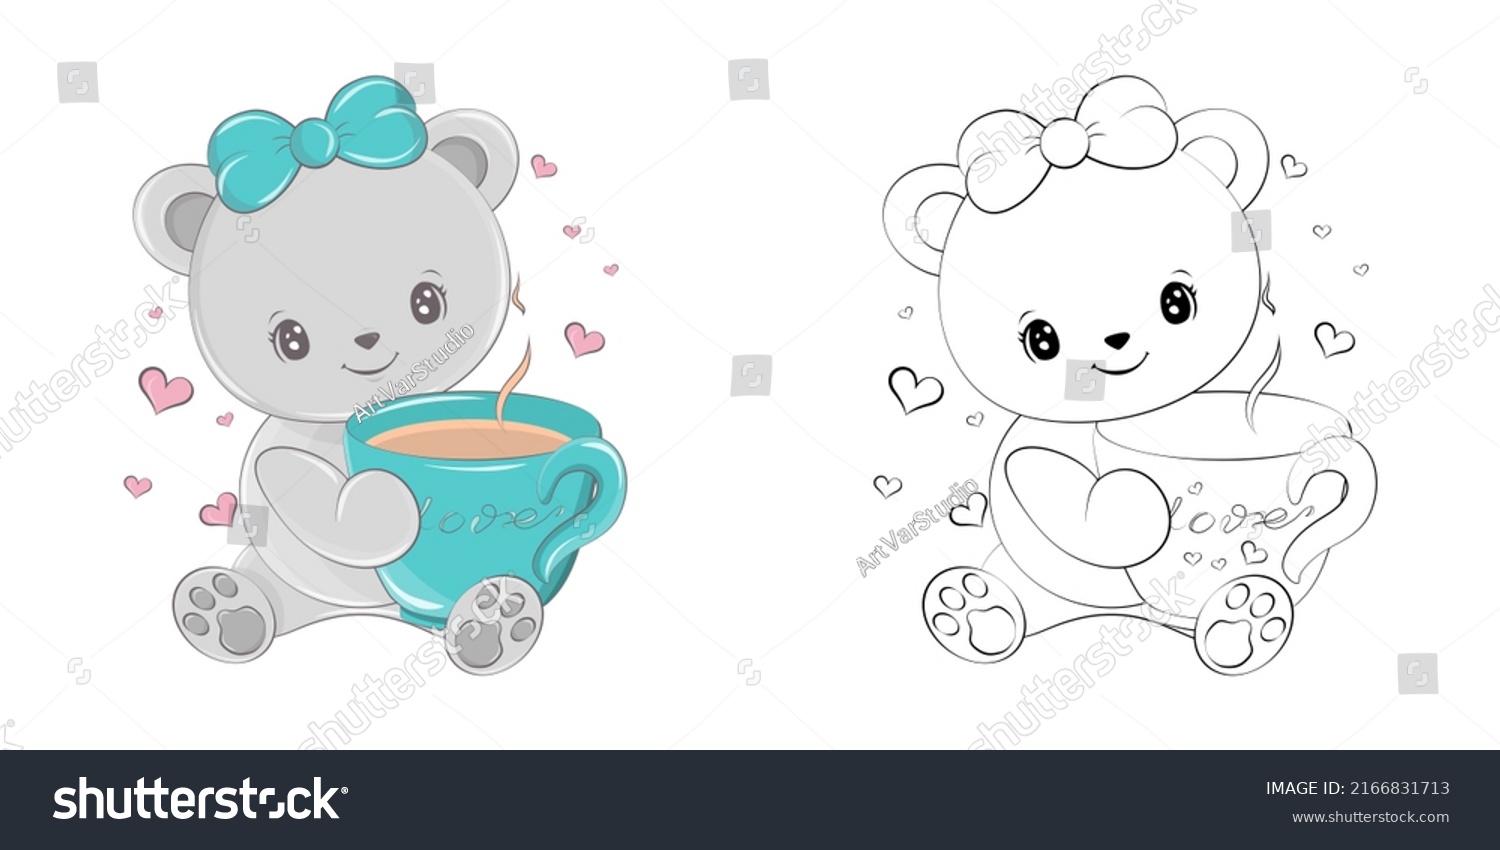 SVG of Cute Bear Clipart for Coloring Page and Illustration. Happy Clip Art Bear with a Cup of Coffee. Vector Illustration of an Animal for Stickers, Prints for Clothes, Baby Shower, Coloring Pages.  svg